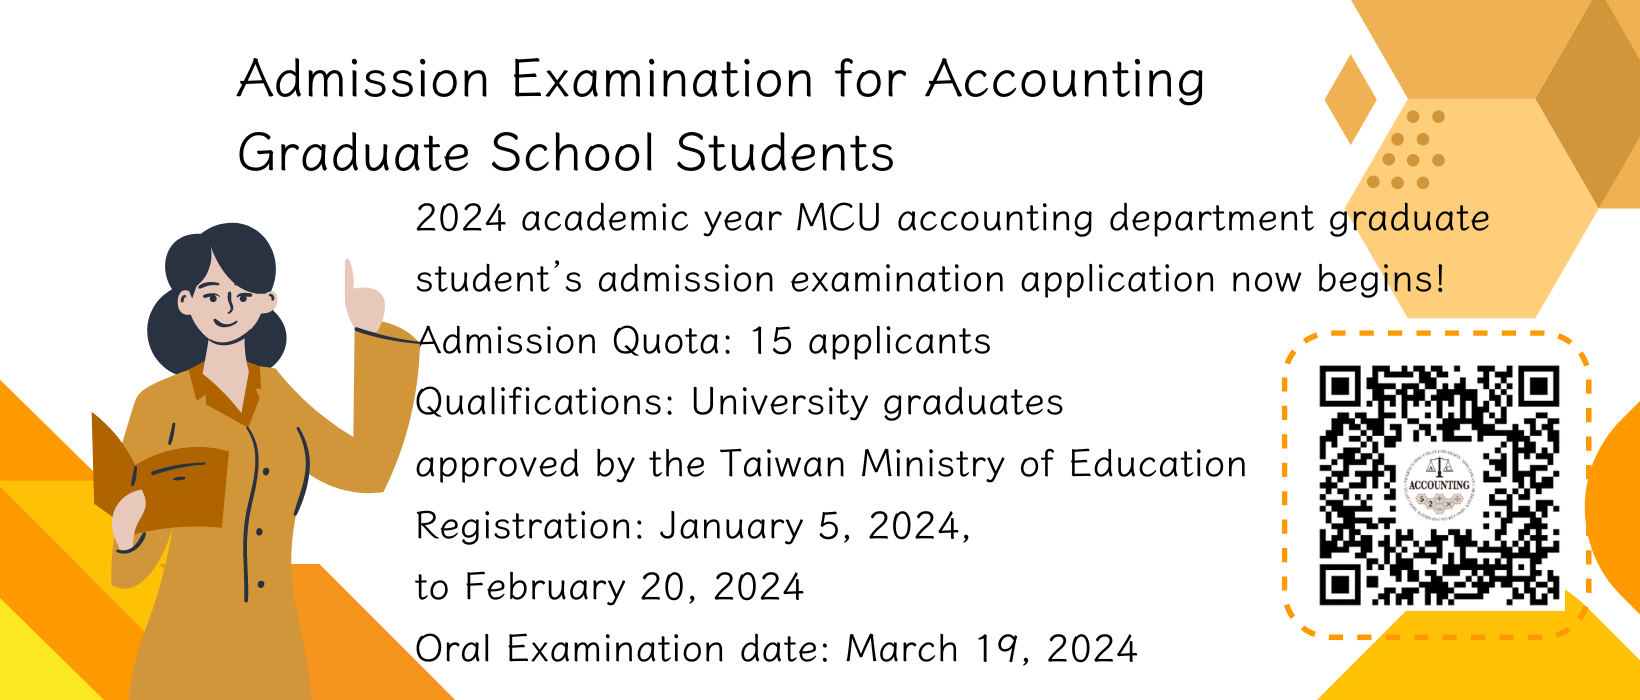 Featured image for “Admission Examination for Accounting Graduate School Students”